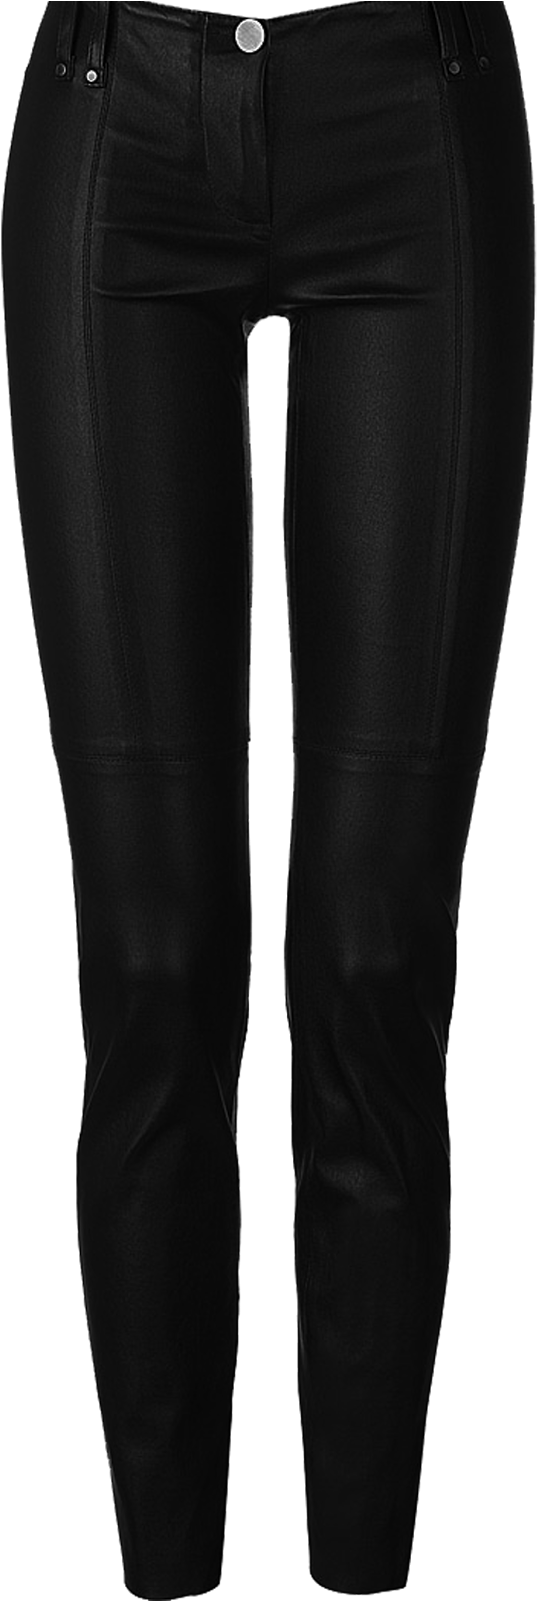 Black Leather Pants Front View PNG